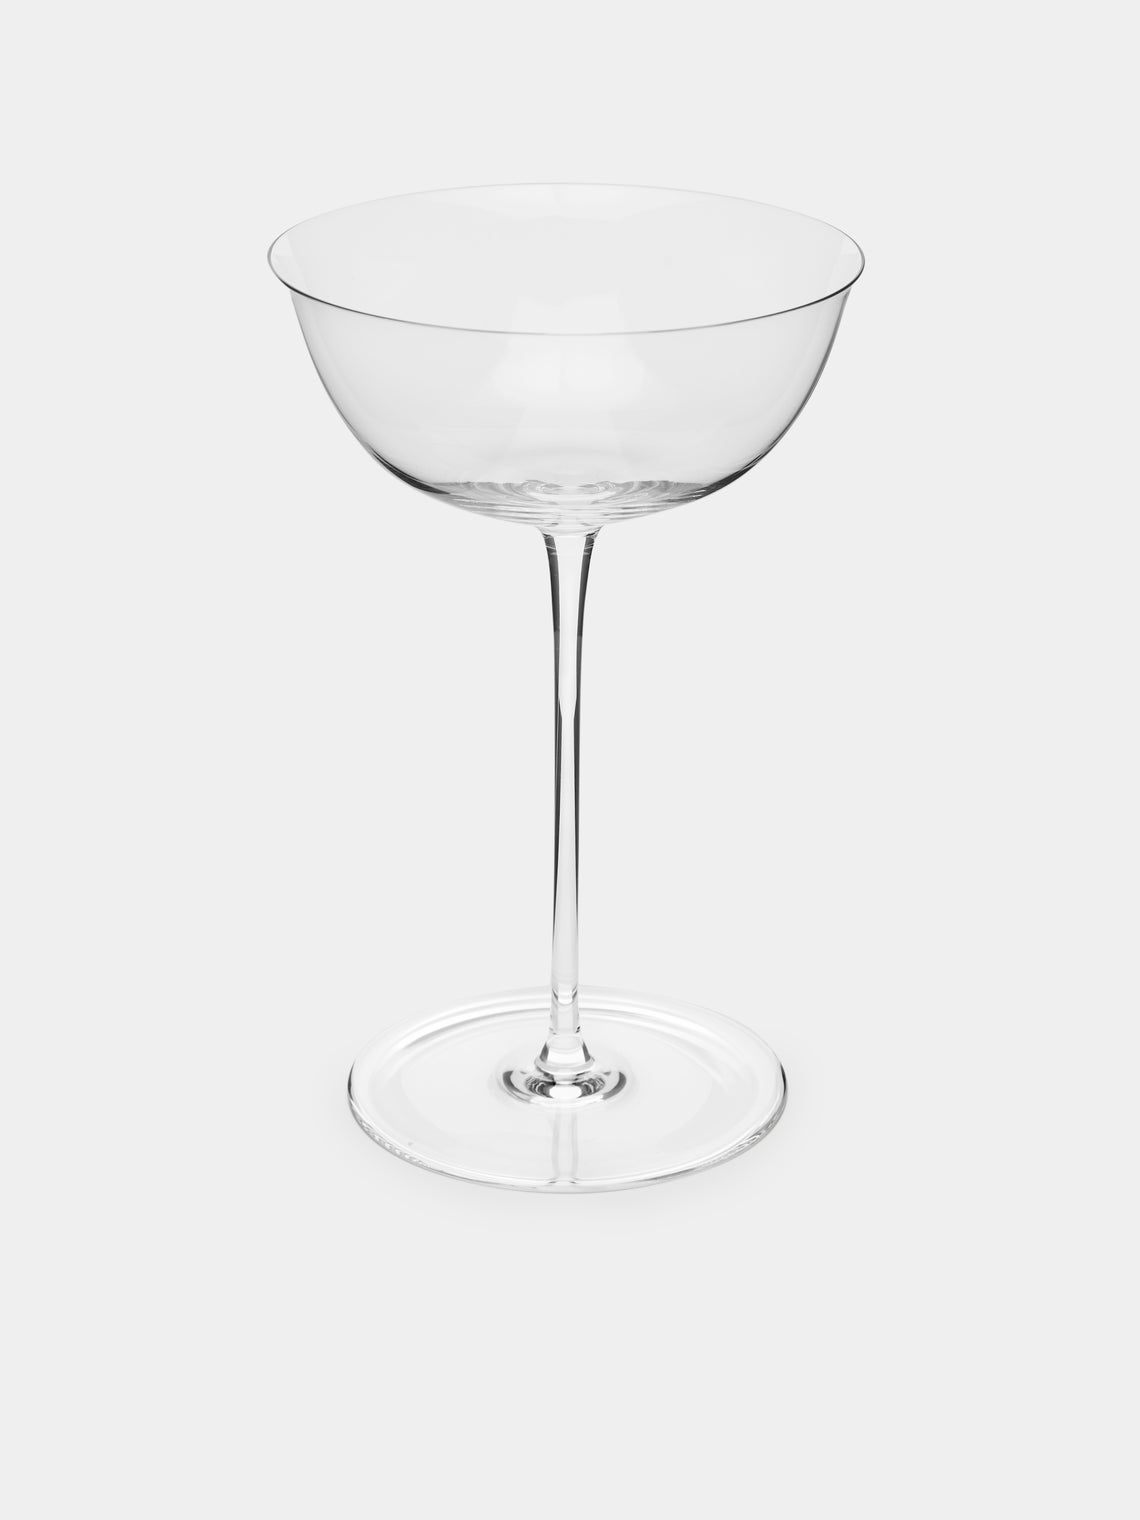 Lobmeyr - Patrician Hand-Blown Crystal Champagne Coupe - Clear - ABASK - 